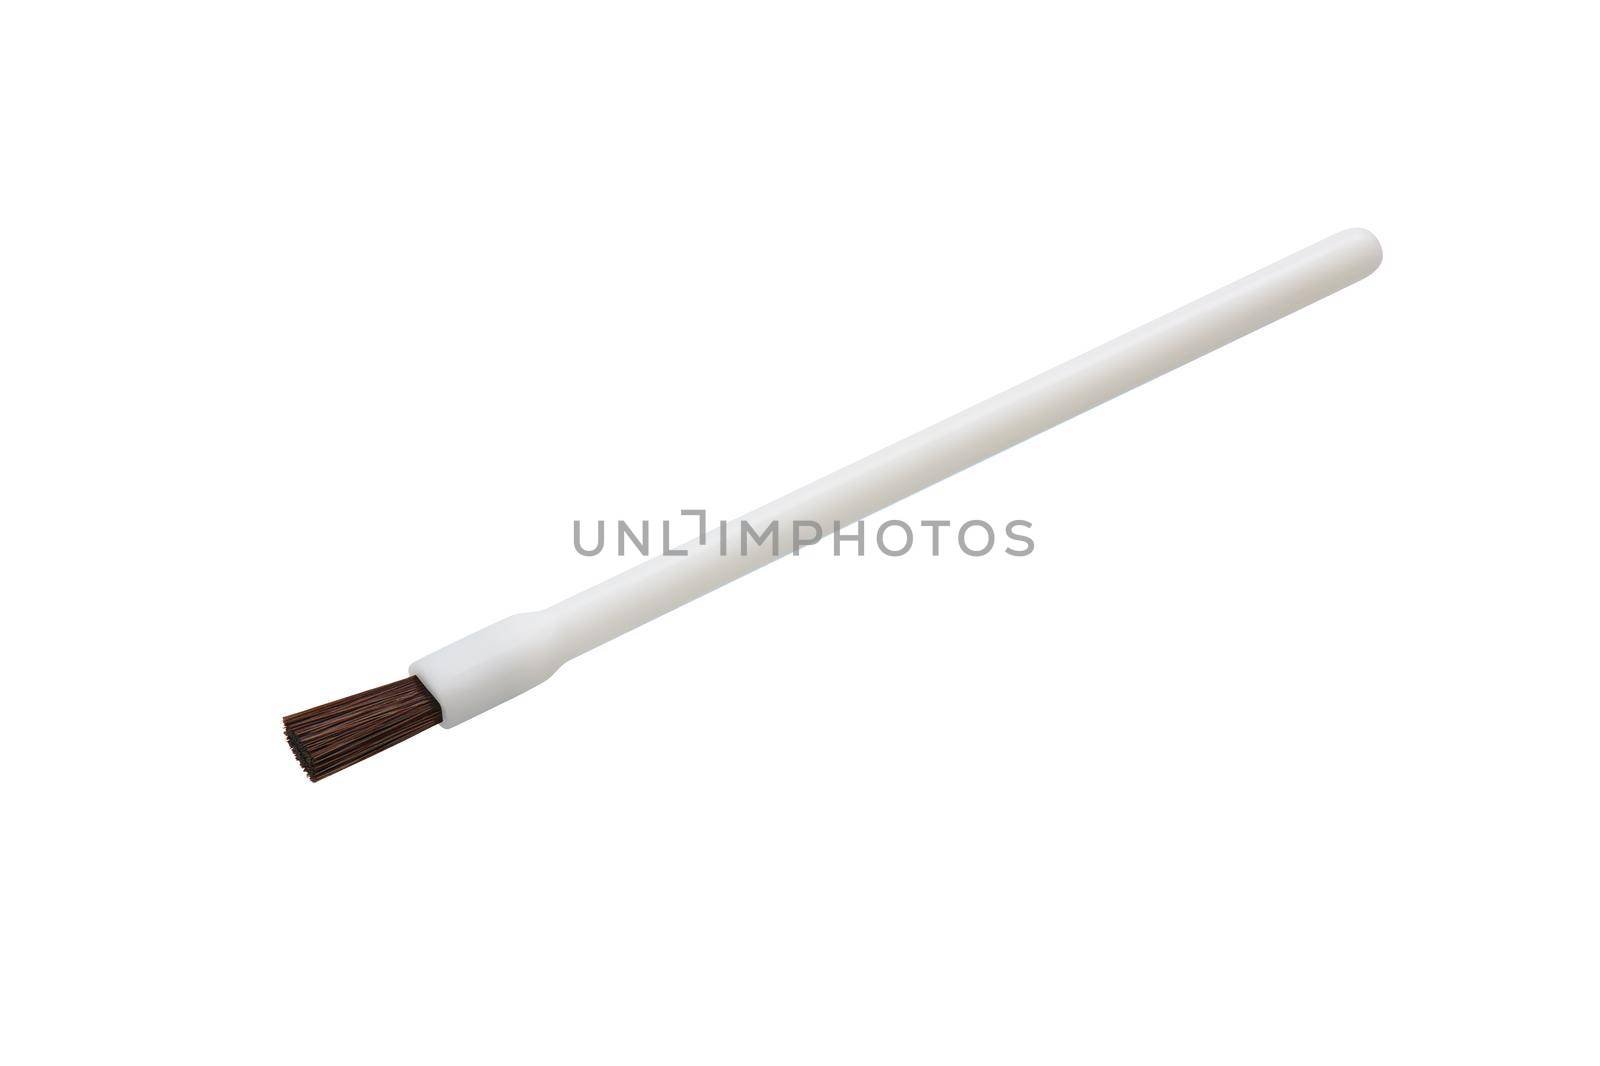 Disposable lip brush for application of lipstick, photo stacking by maxcab